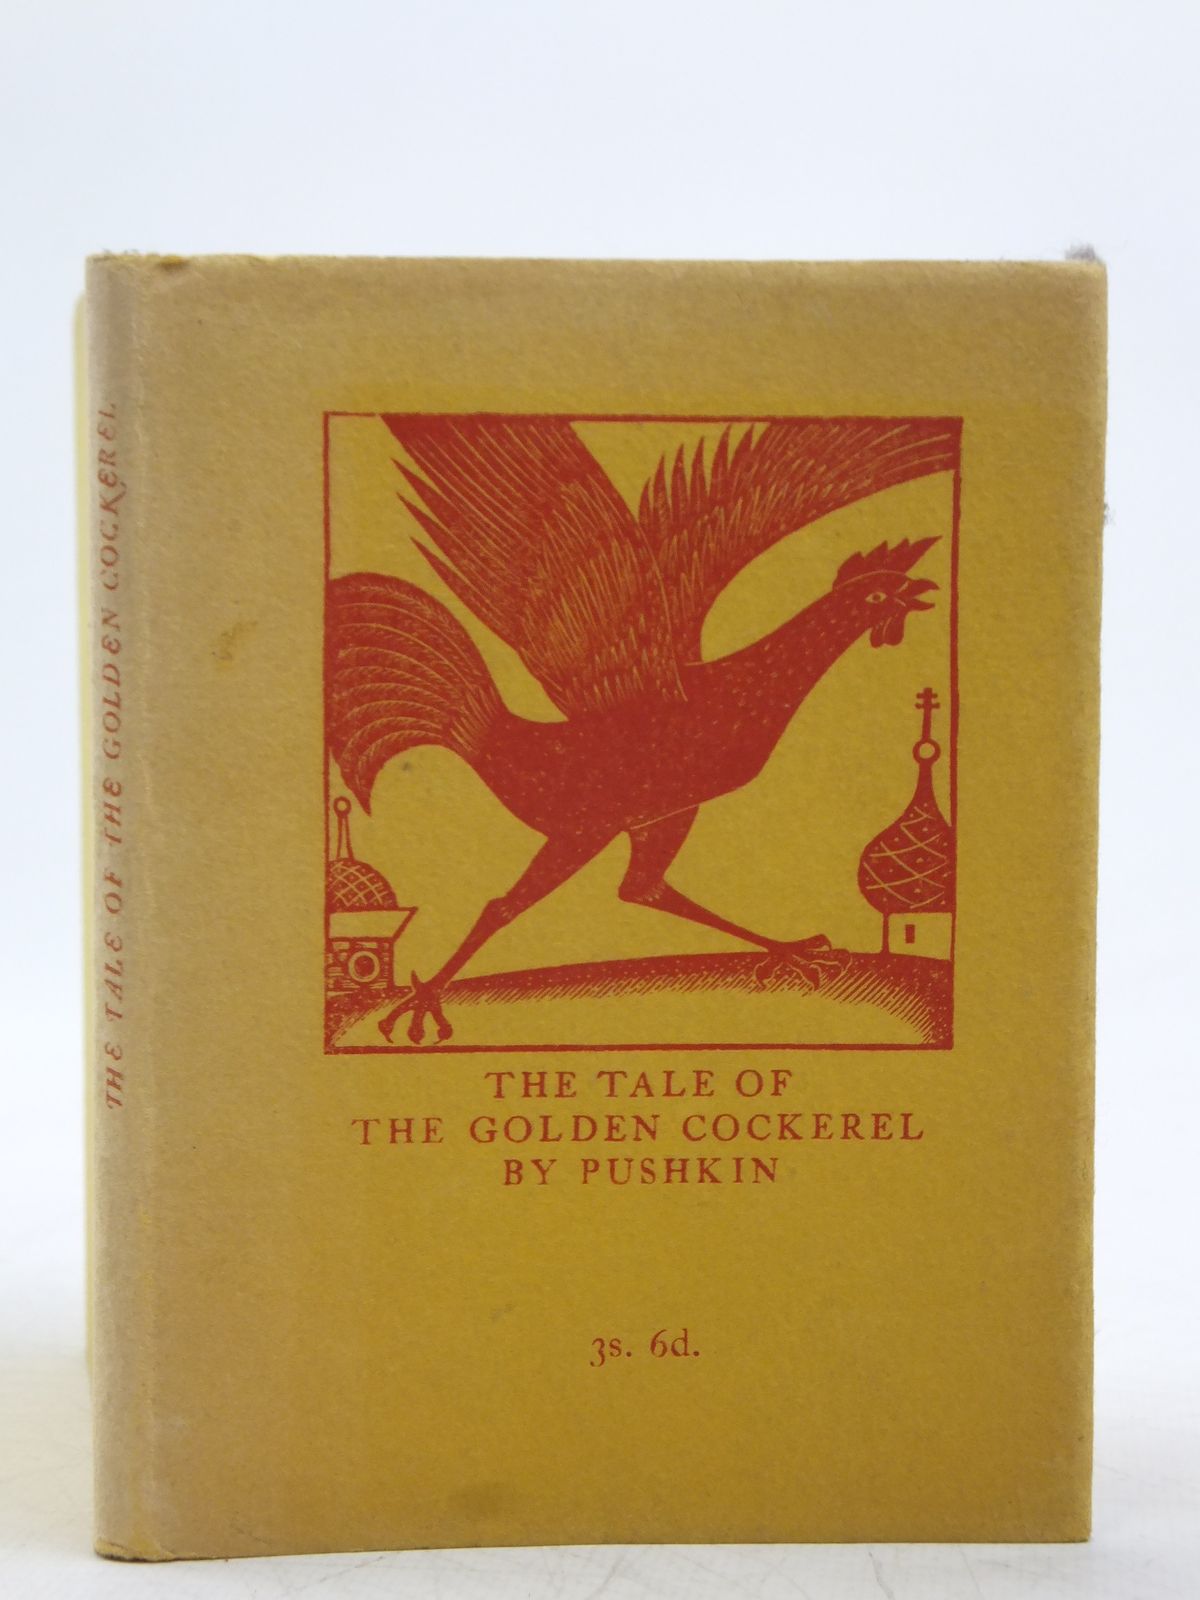 Photo of THE TALE OF THE GOLDEN COCKEREL written by Pushkin, A.S.
Waller, Hannah published by The Golden Cockerel Press (STOCK CODE: 2119295)  for sale by Stella & Rose's Books